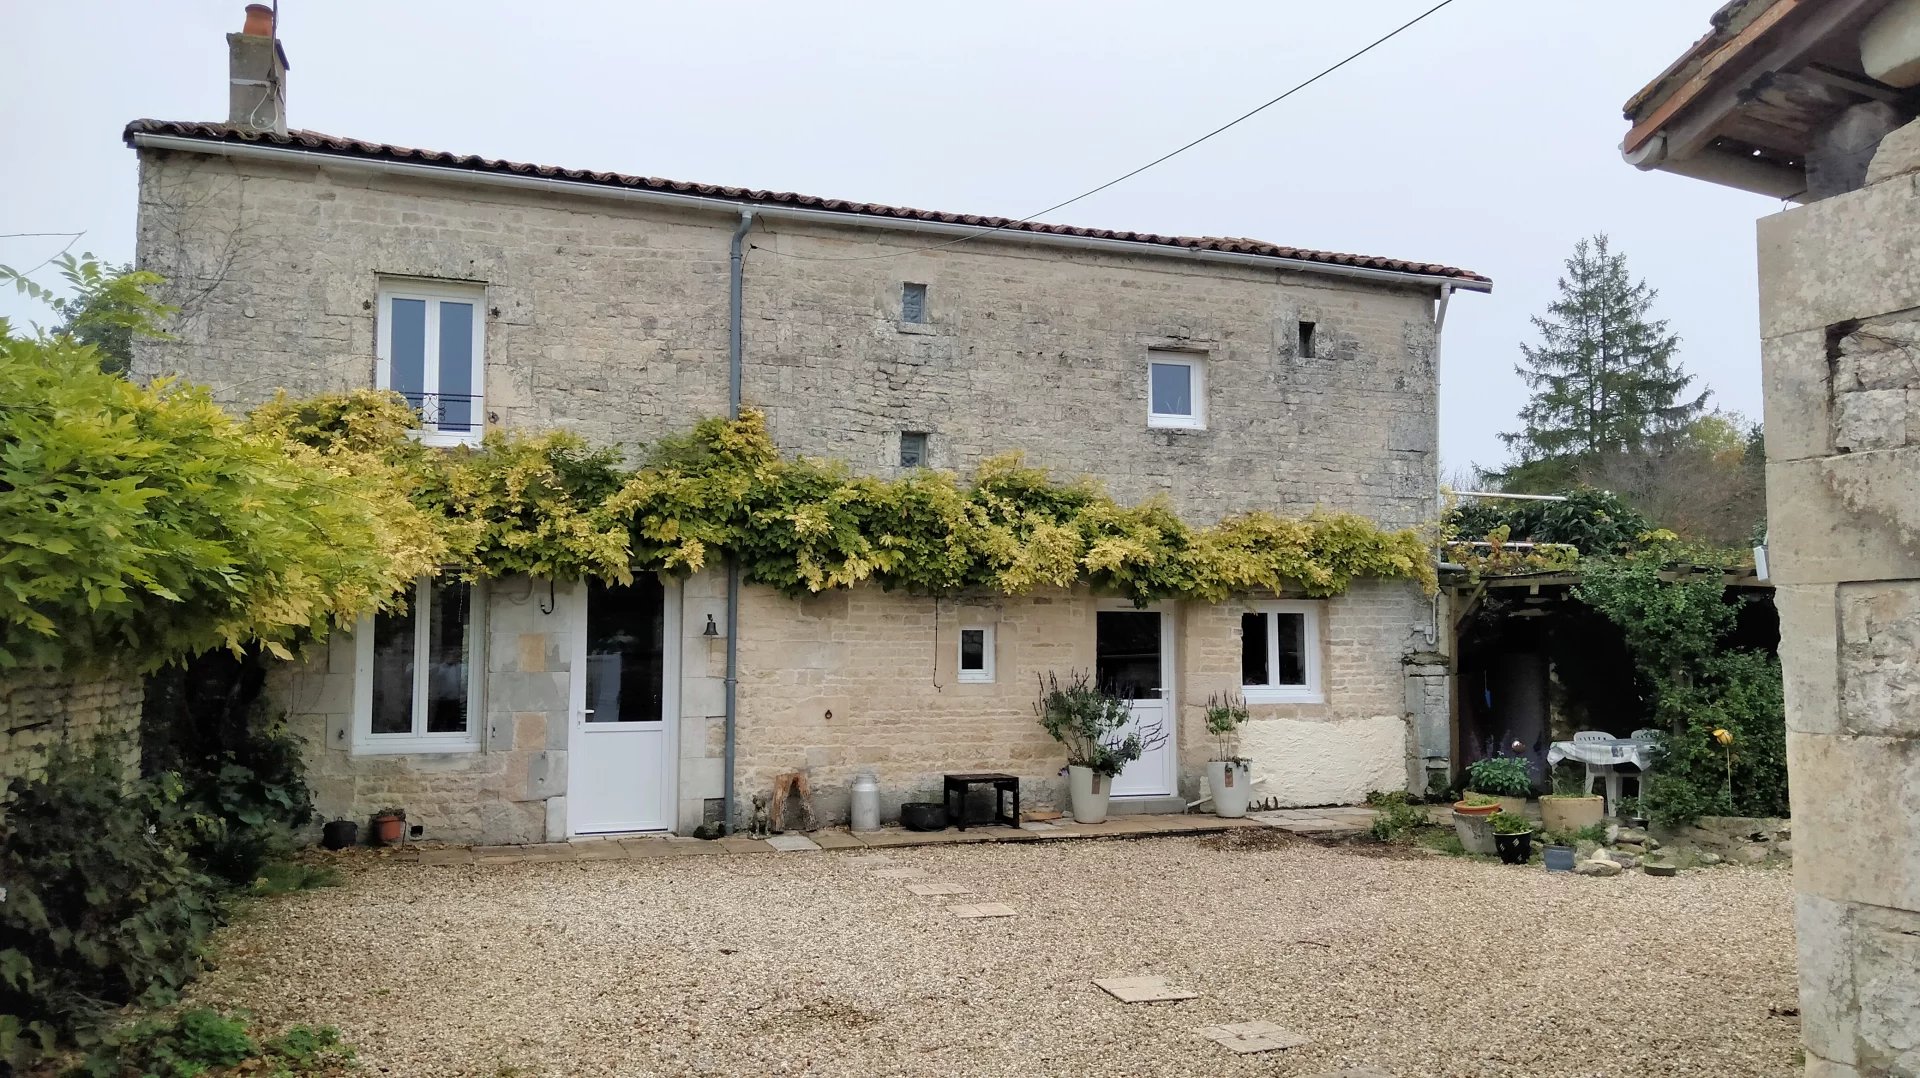 Immaculate detached stone village house with pool